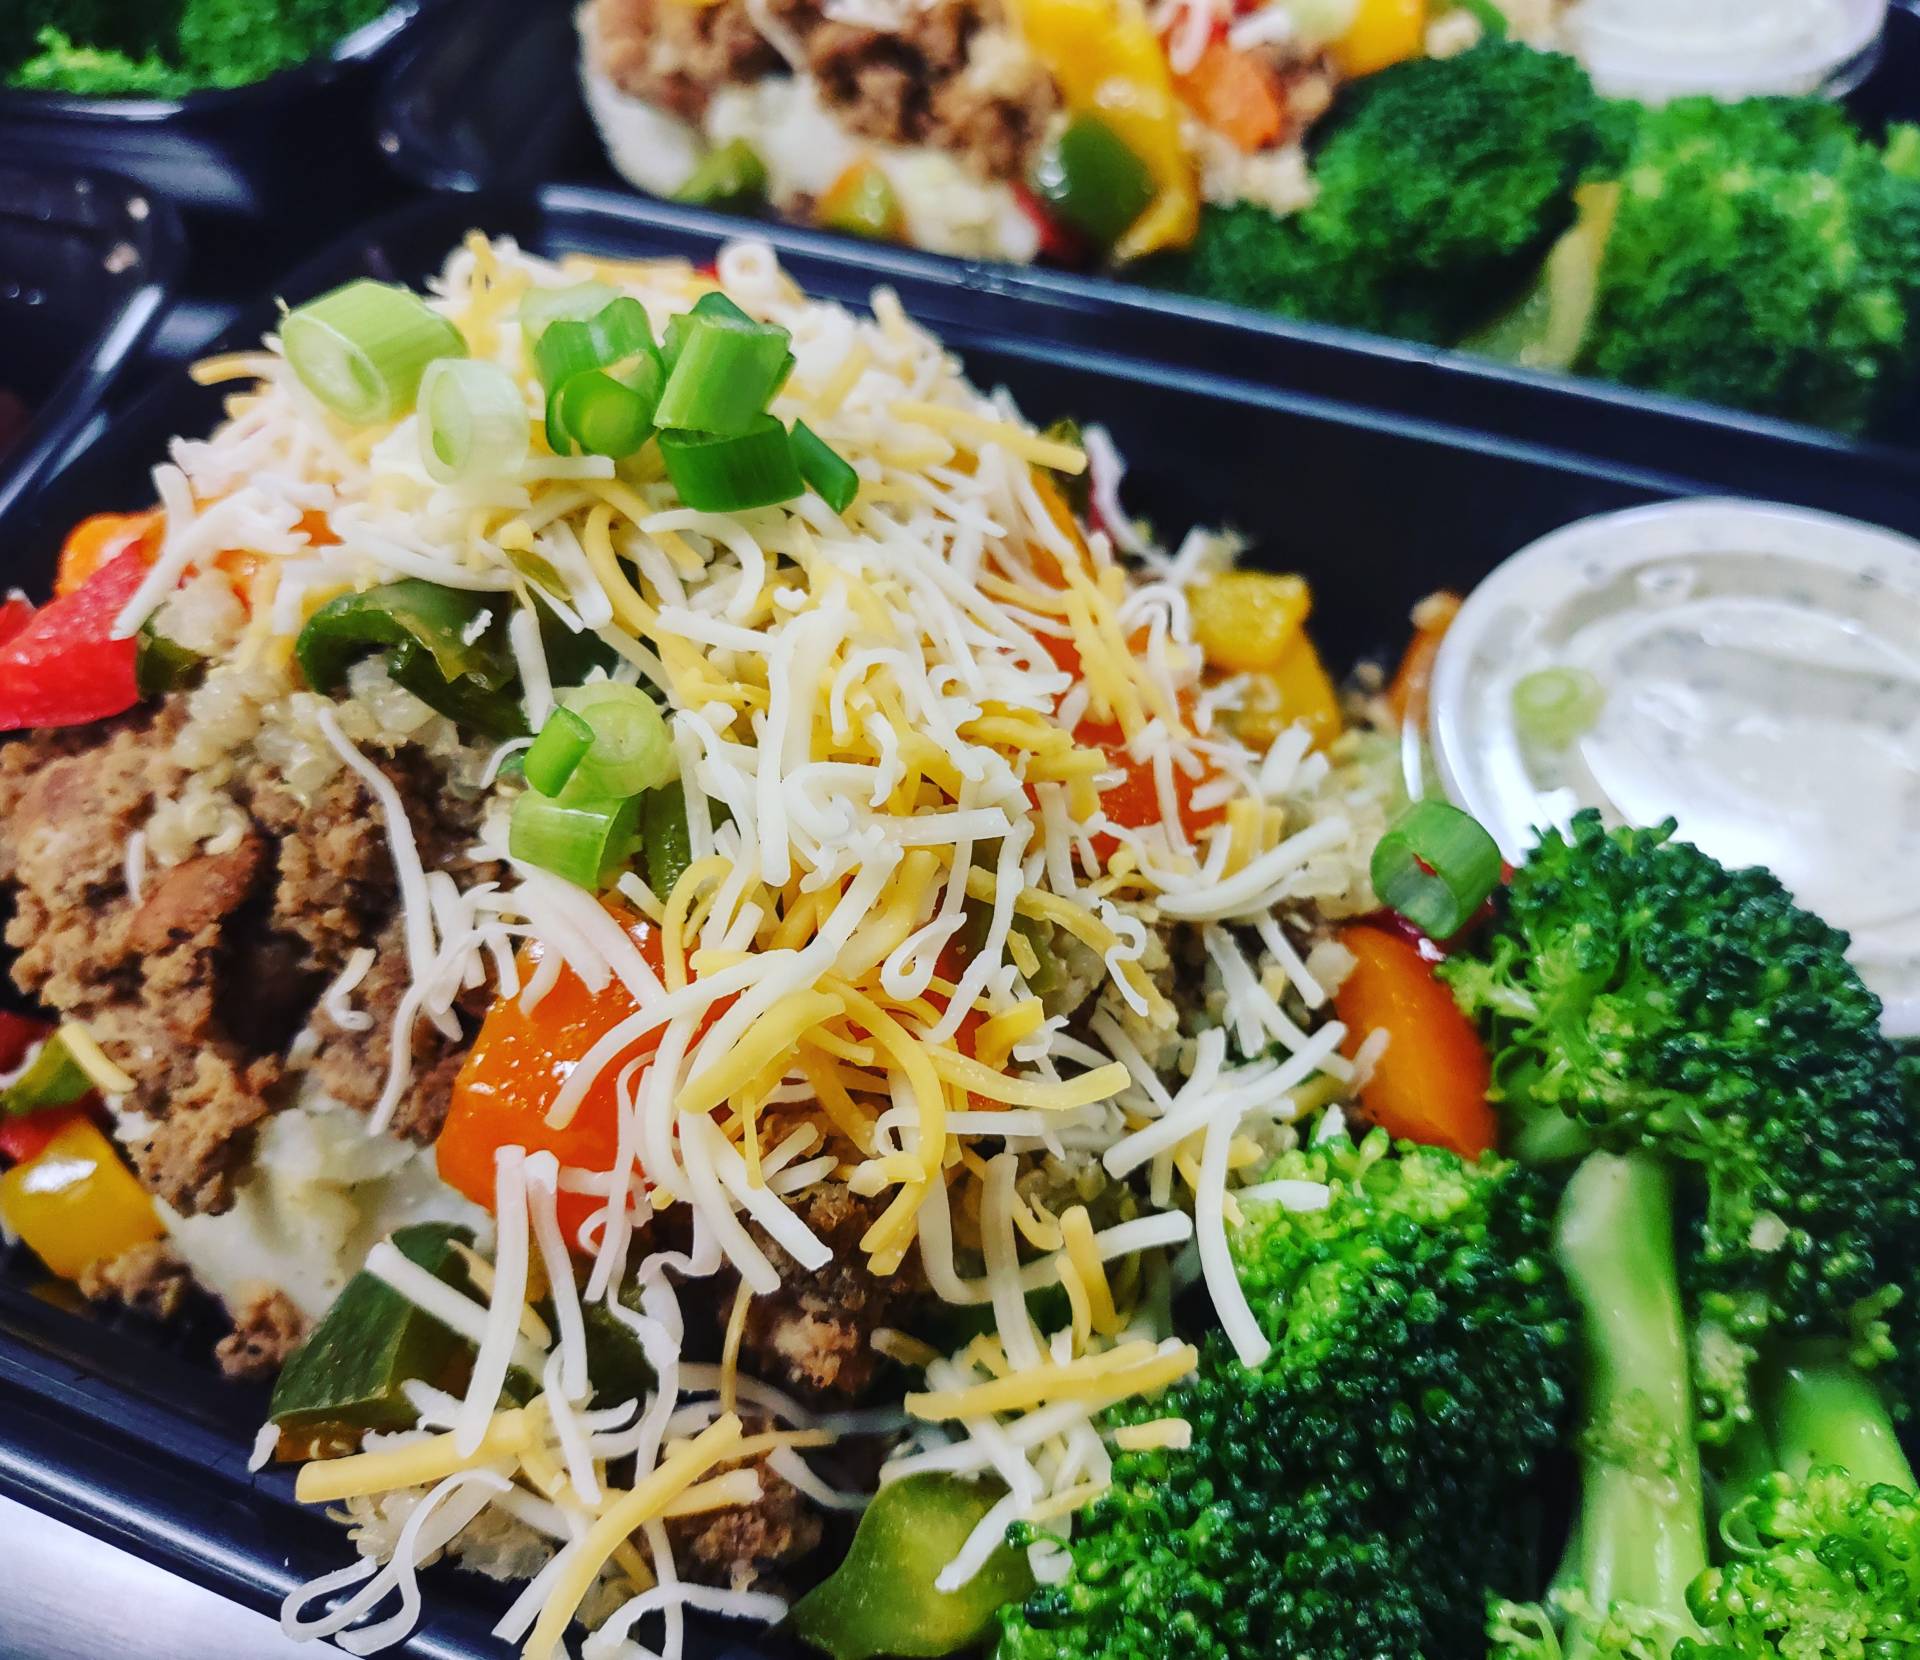 Loaded Broccolini w/ Seasoned Grass-fed Beef, Peppers, Blended Cheddar, Sunflower Seeds & Green Onions...Chive Sour Cream.